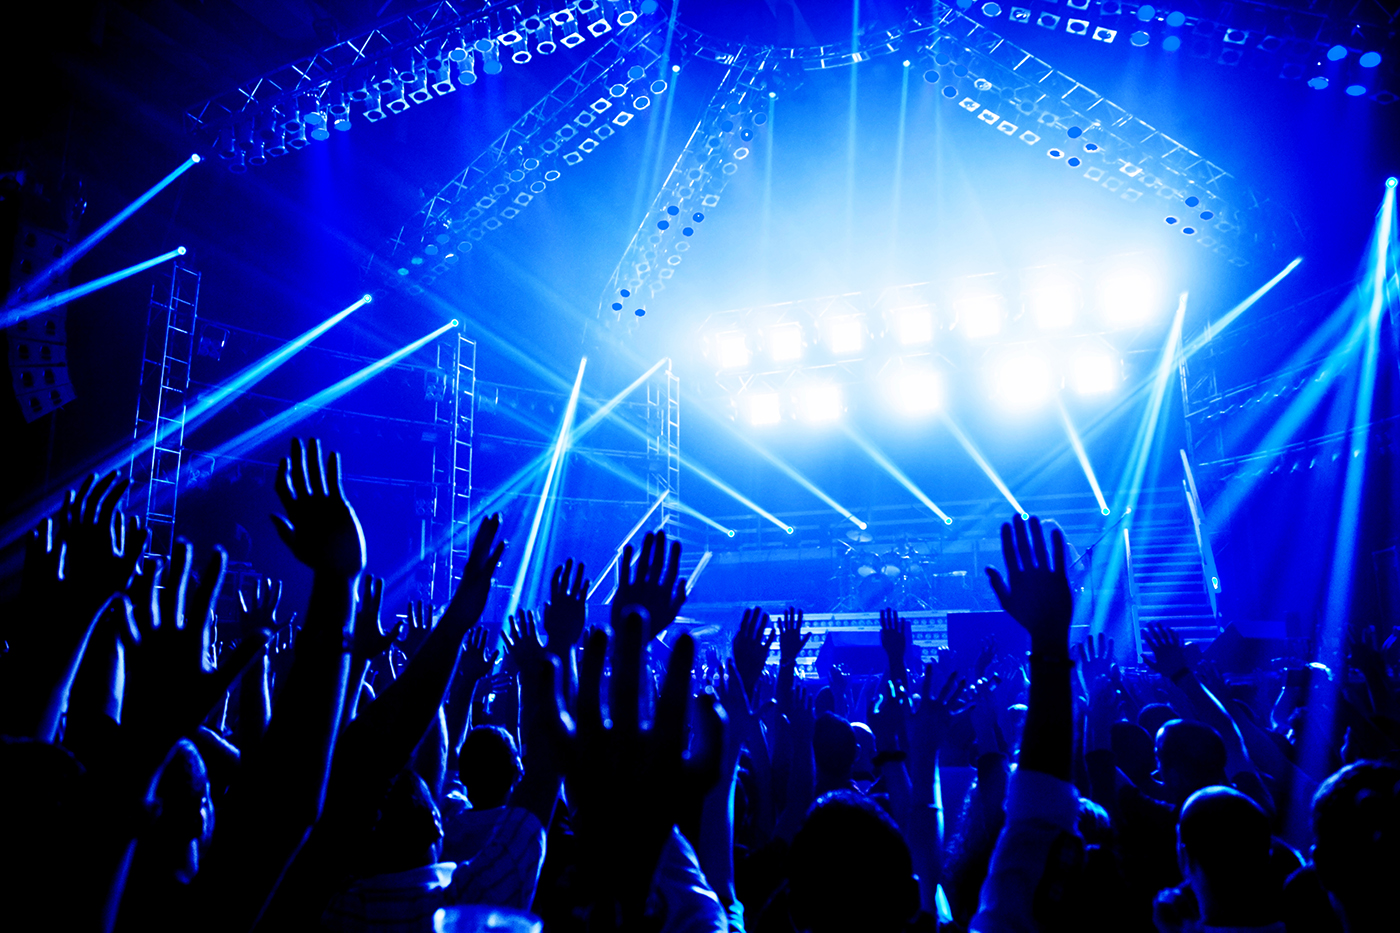 Show off those lights – stage and club lighting